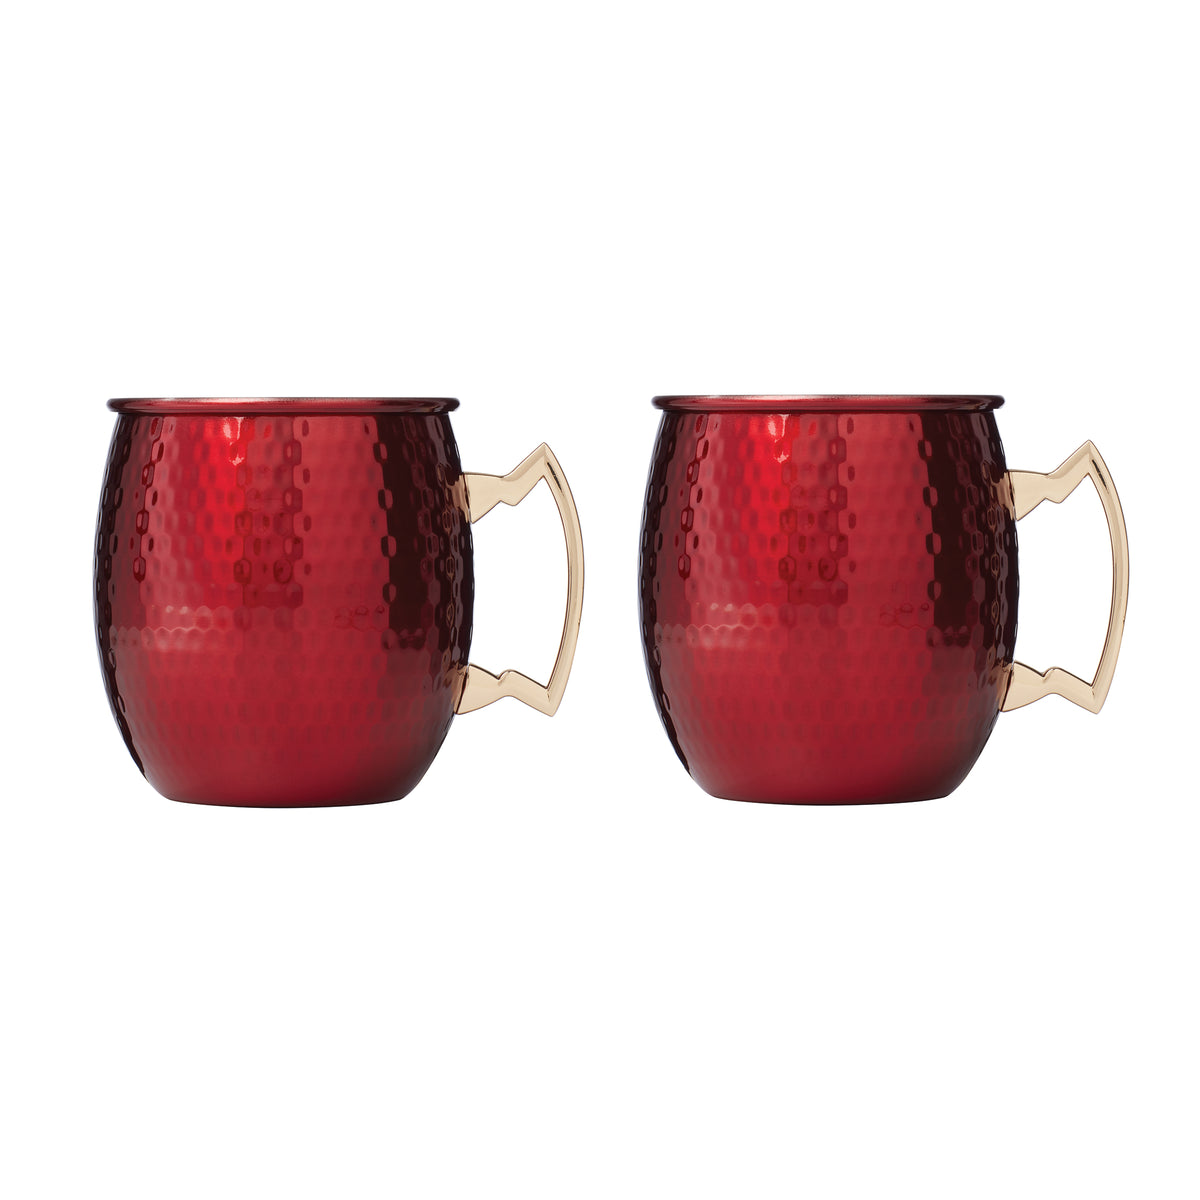 20 Oz Hammered Red Moscow Mule Mugs, Set of 2